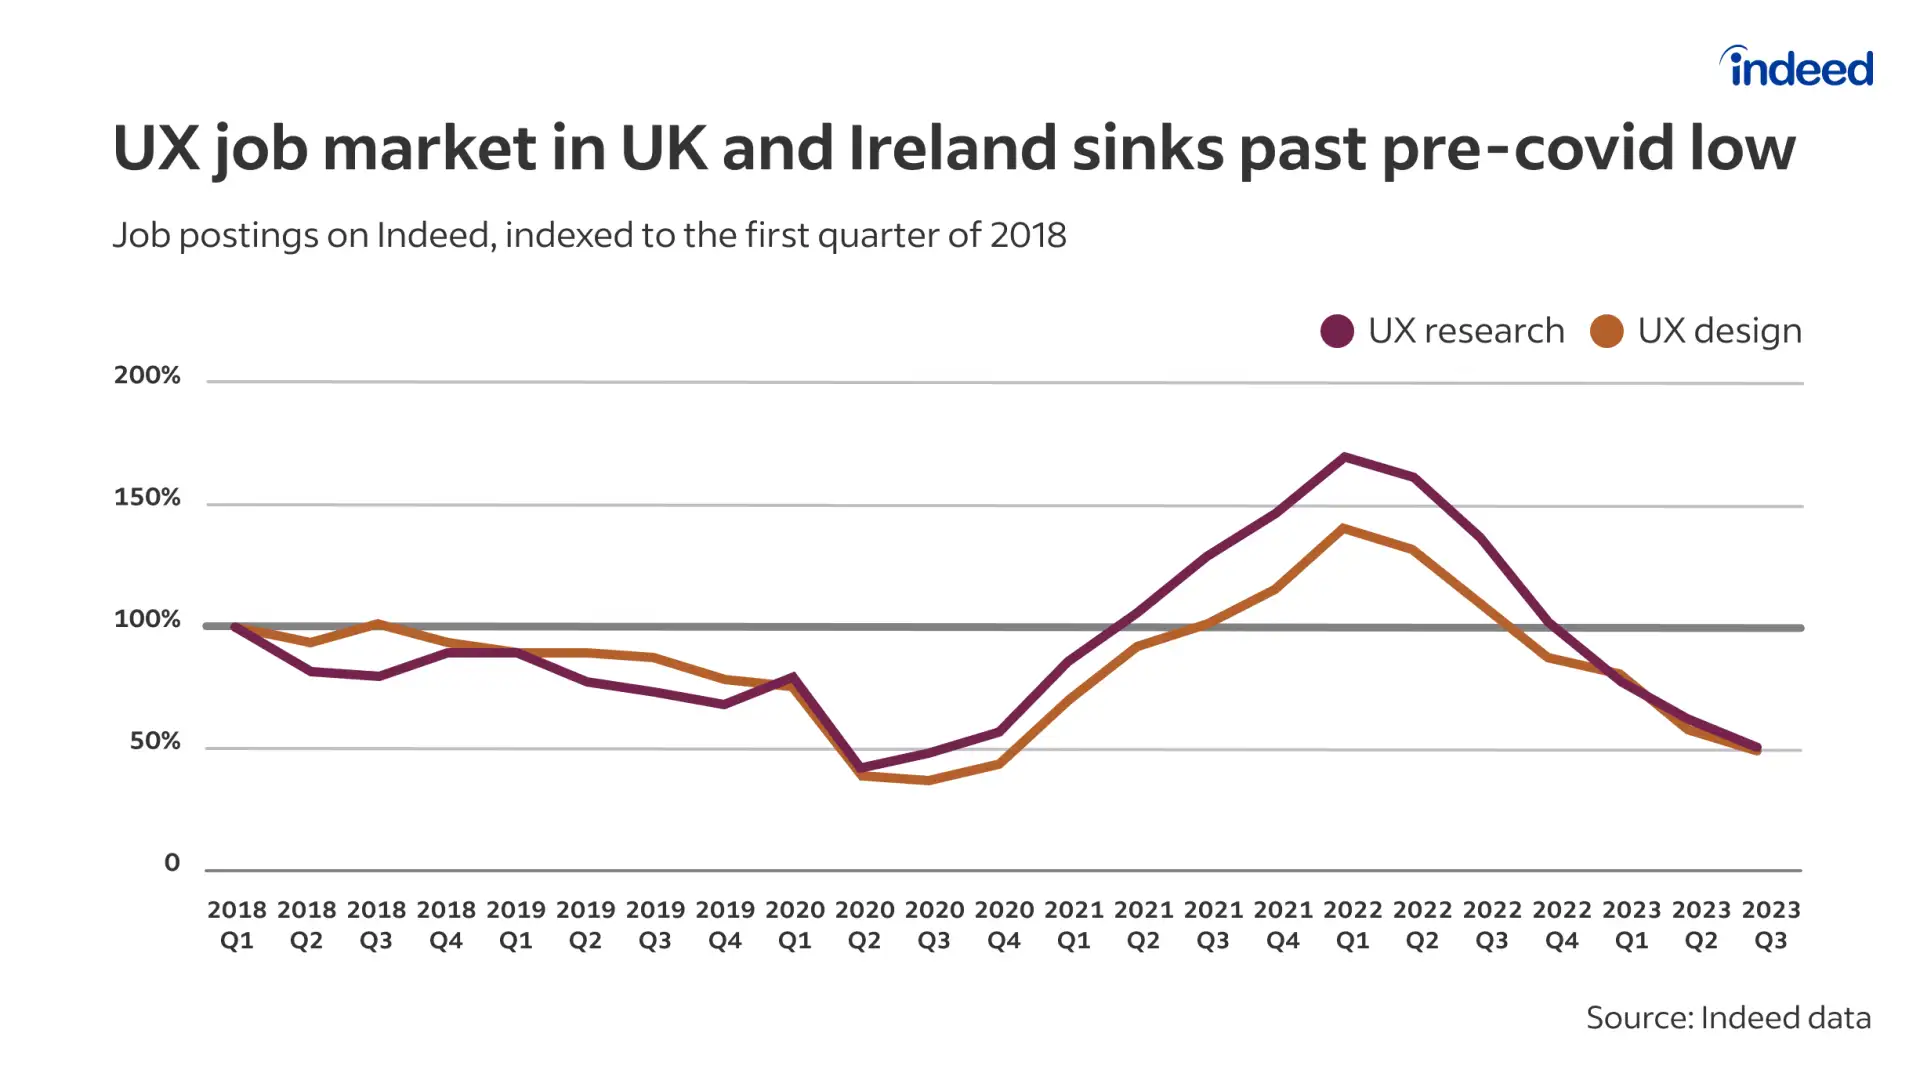 Line chart of UK and Ireland UX design and research jobs on Indeed where posts in Q3 2023 are roughly 50% of Q1 2018 levels